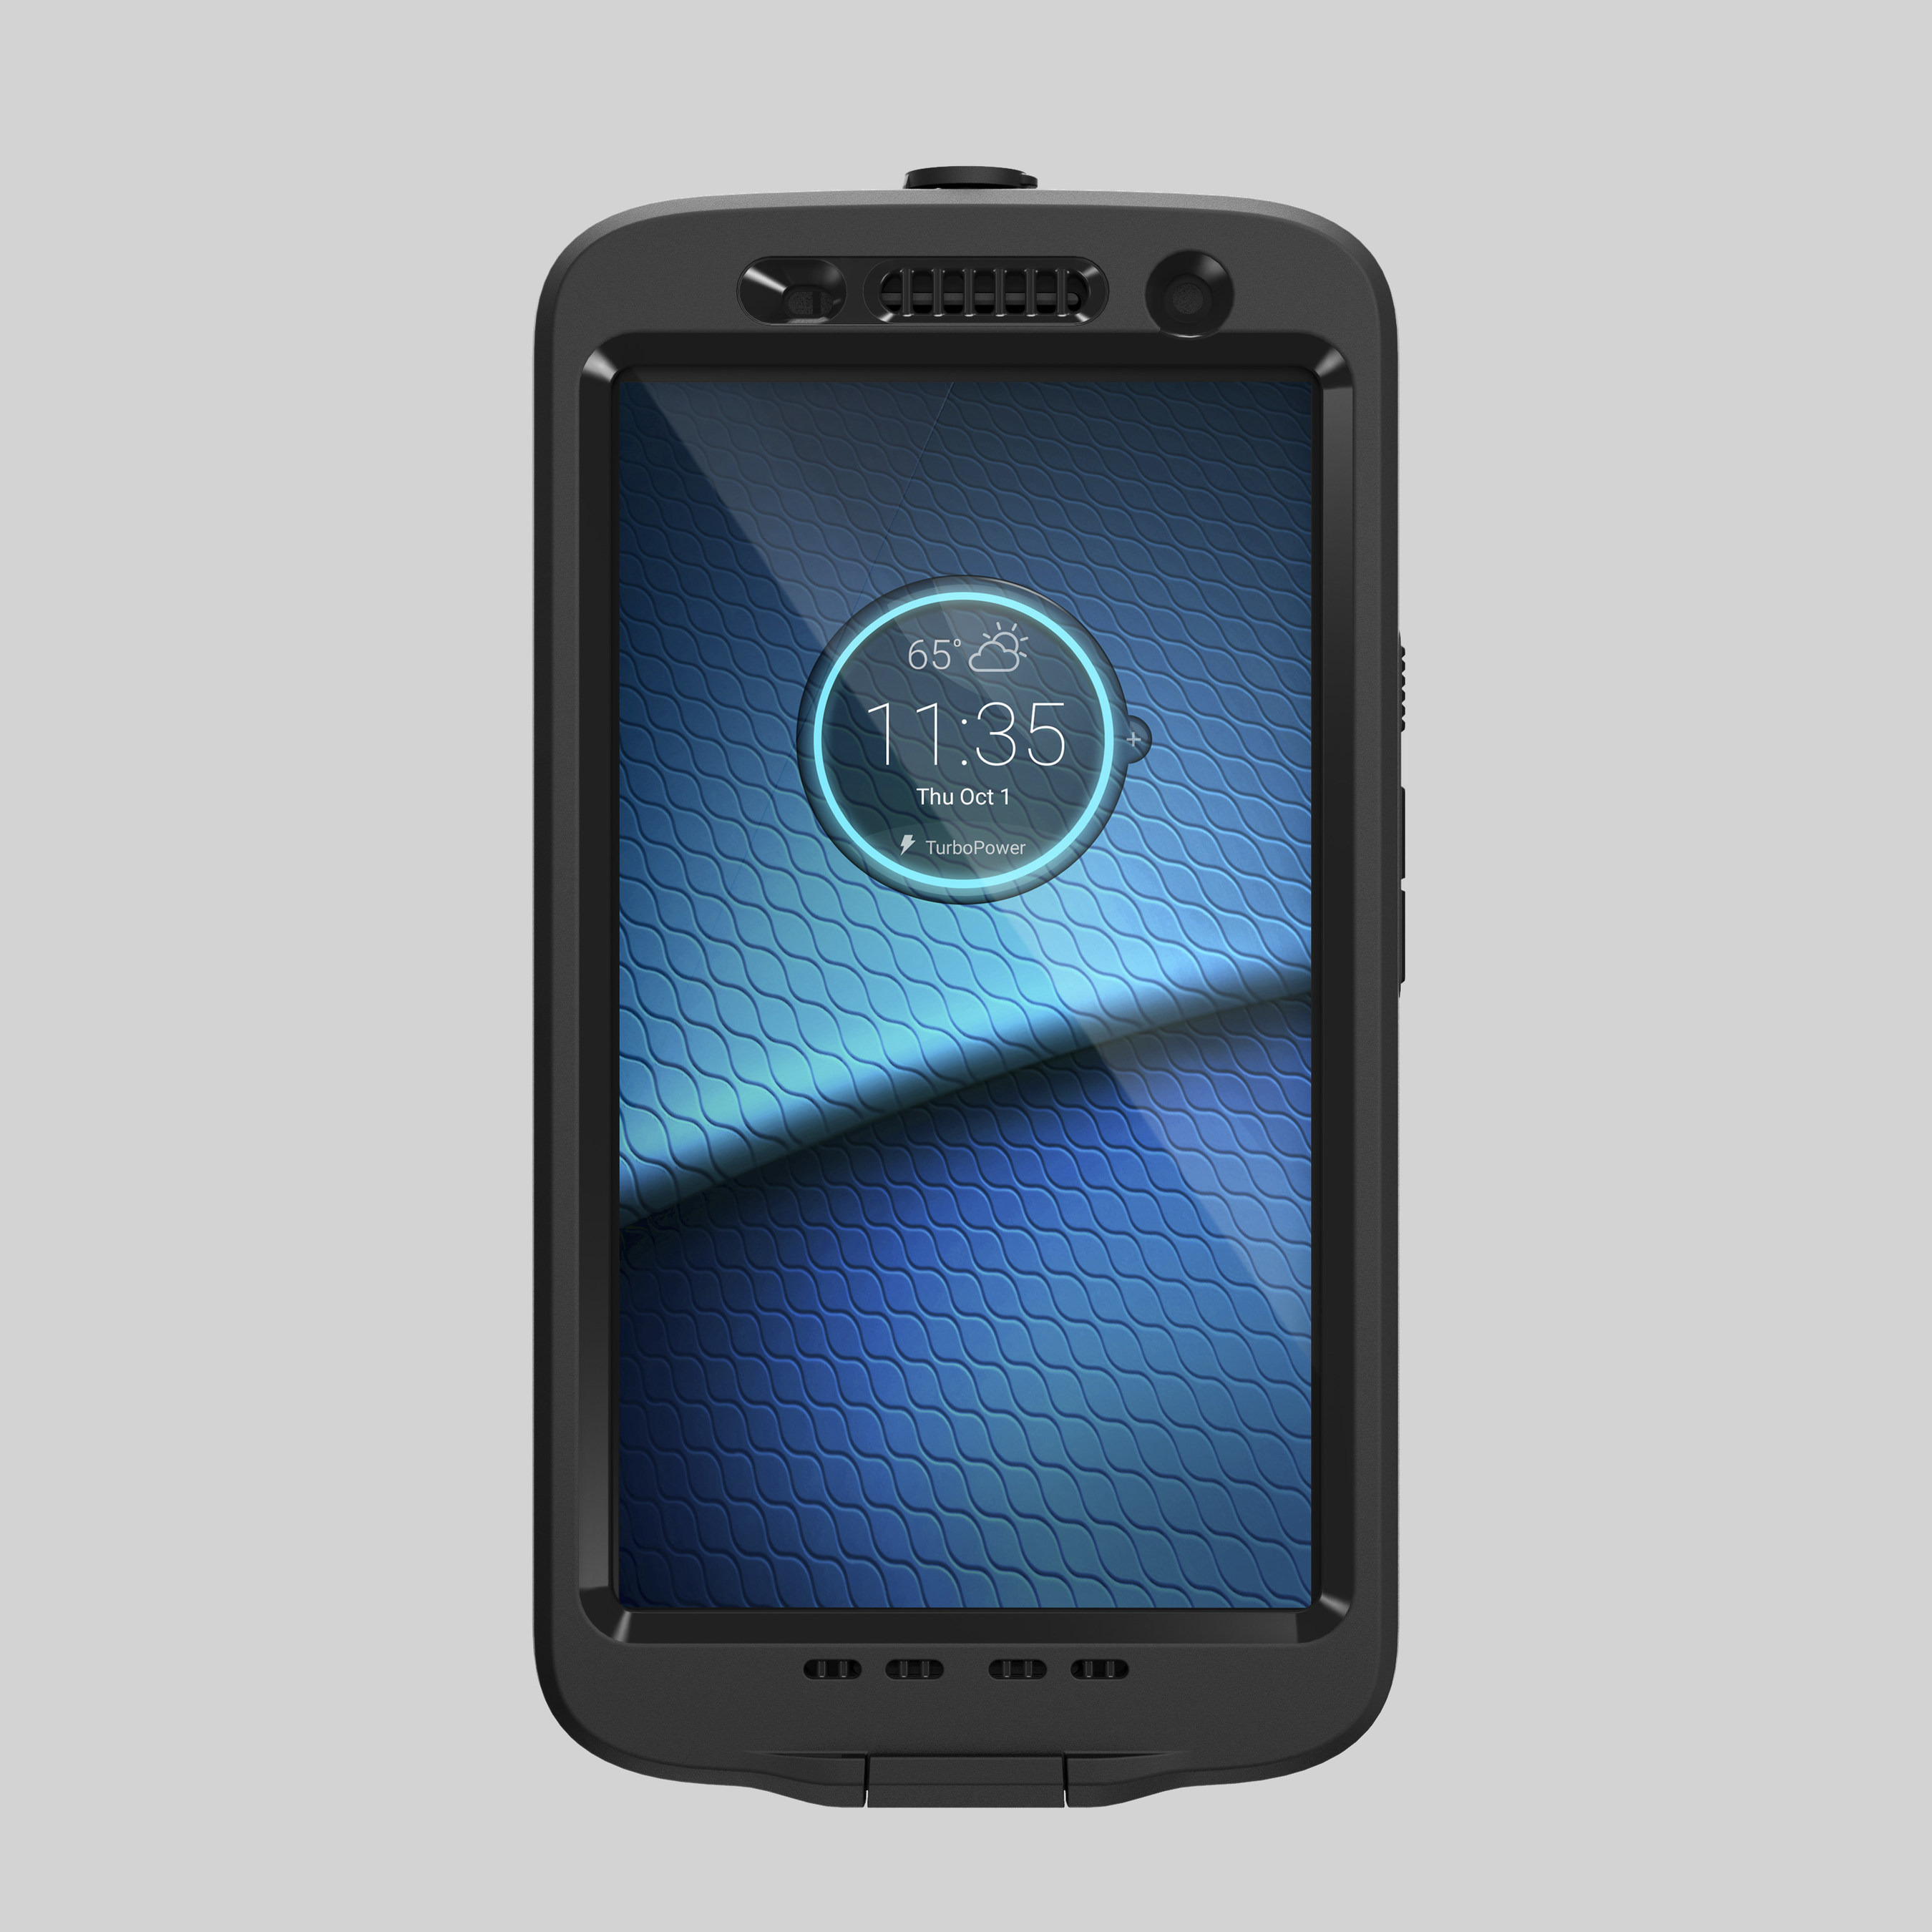 LifeProof FRE for DROID Maxx 2 is available today on lifeproof.com.